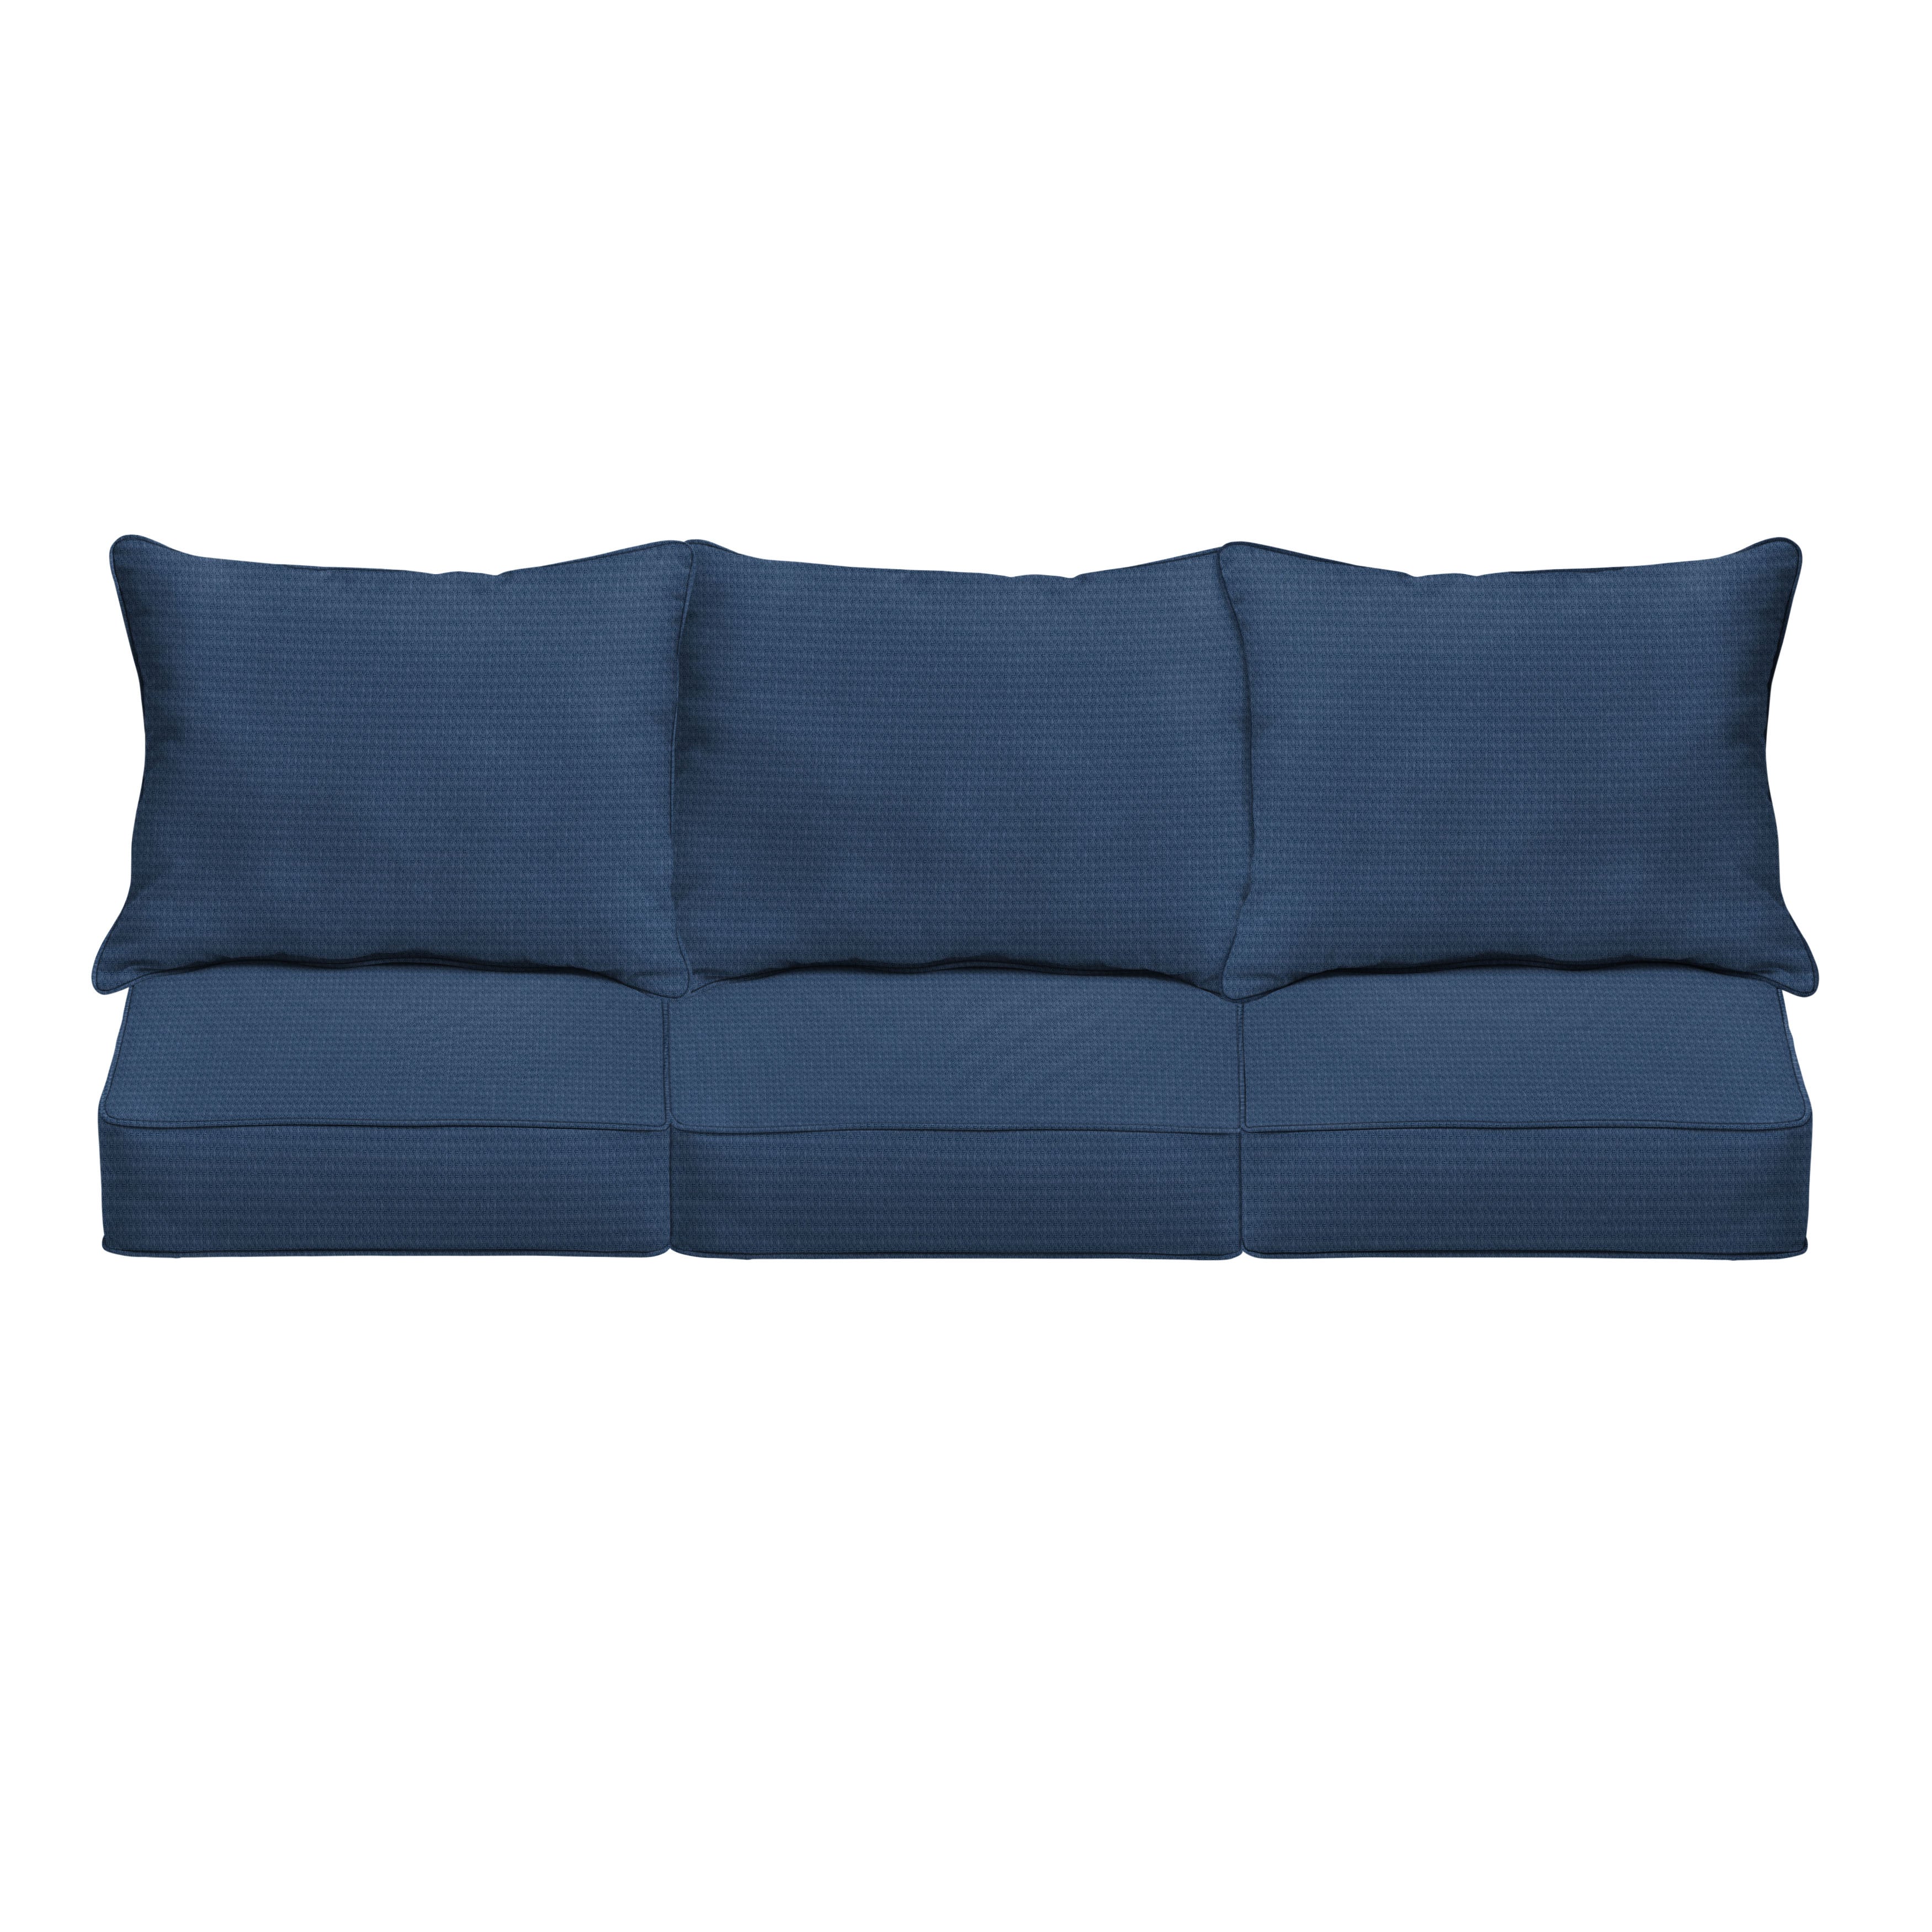 Outdura Square Outdoor Deep Seating Sofa Pillow and Cushion Set